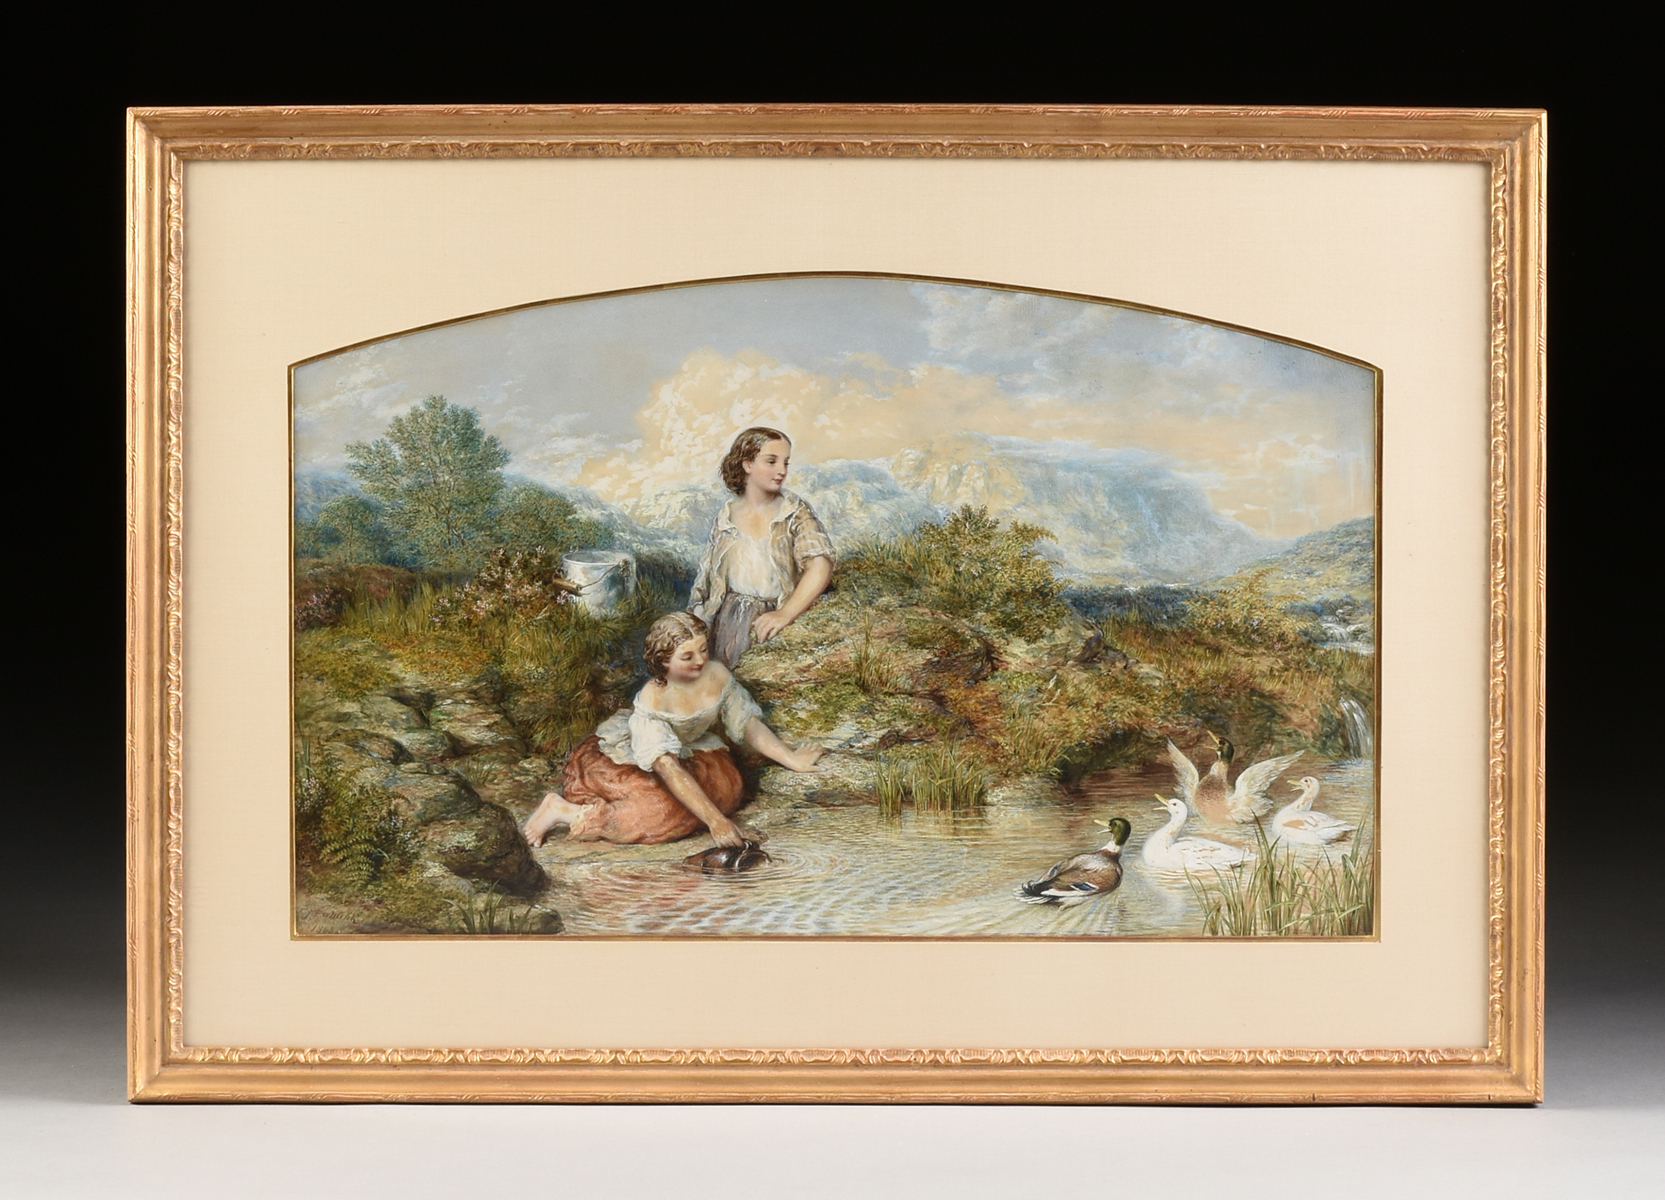 THOMAS JOHN EWBANK (Scottish a. 1826-1863) A PAINTING, "Water Gathering Young Couple and Ducks at - Image 2 of 12